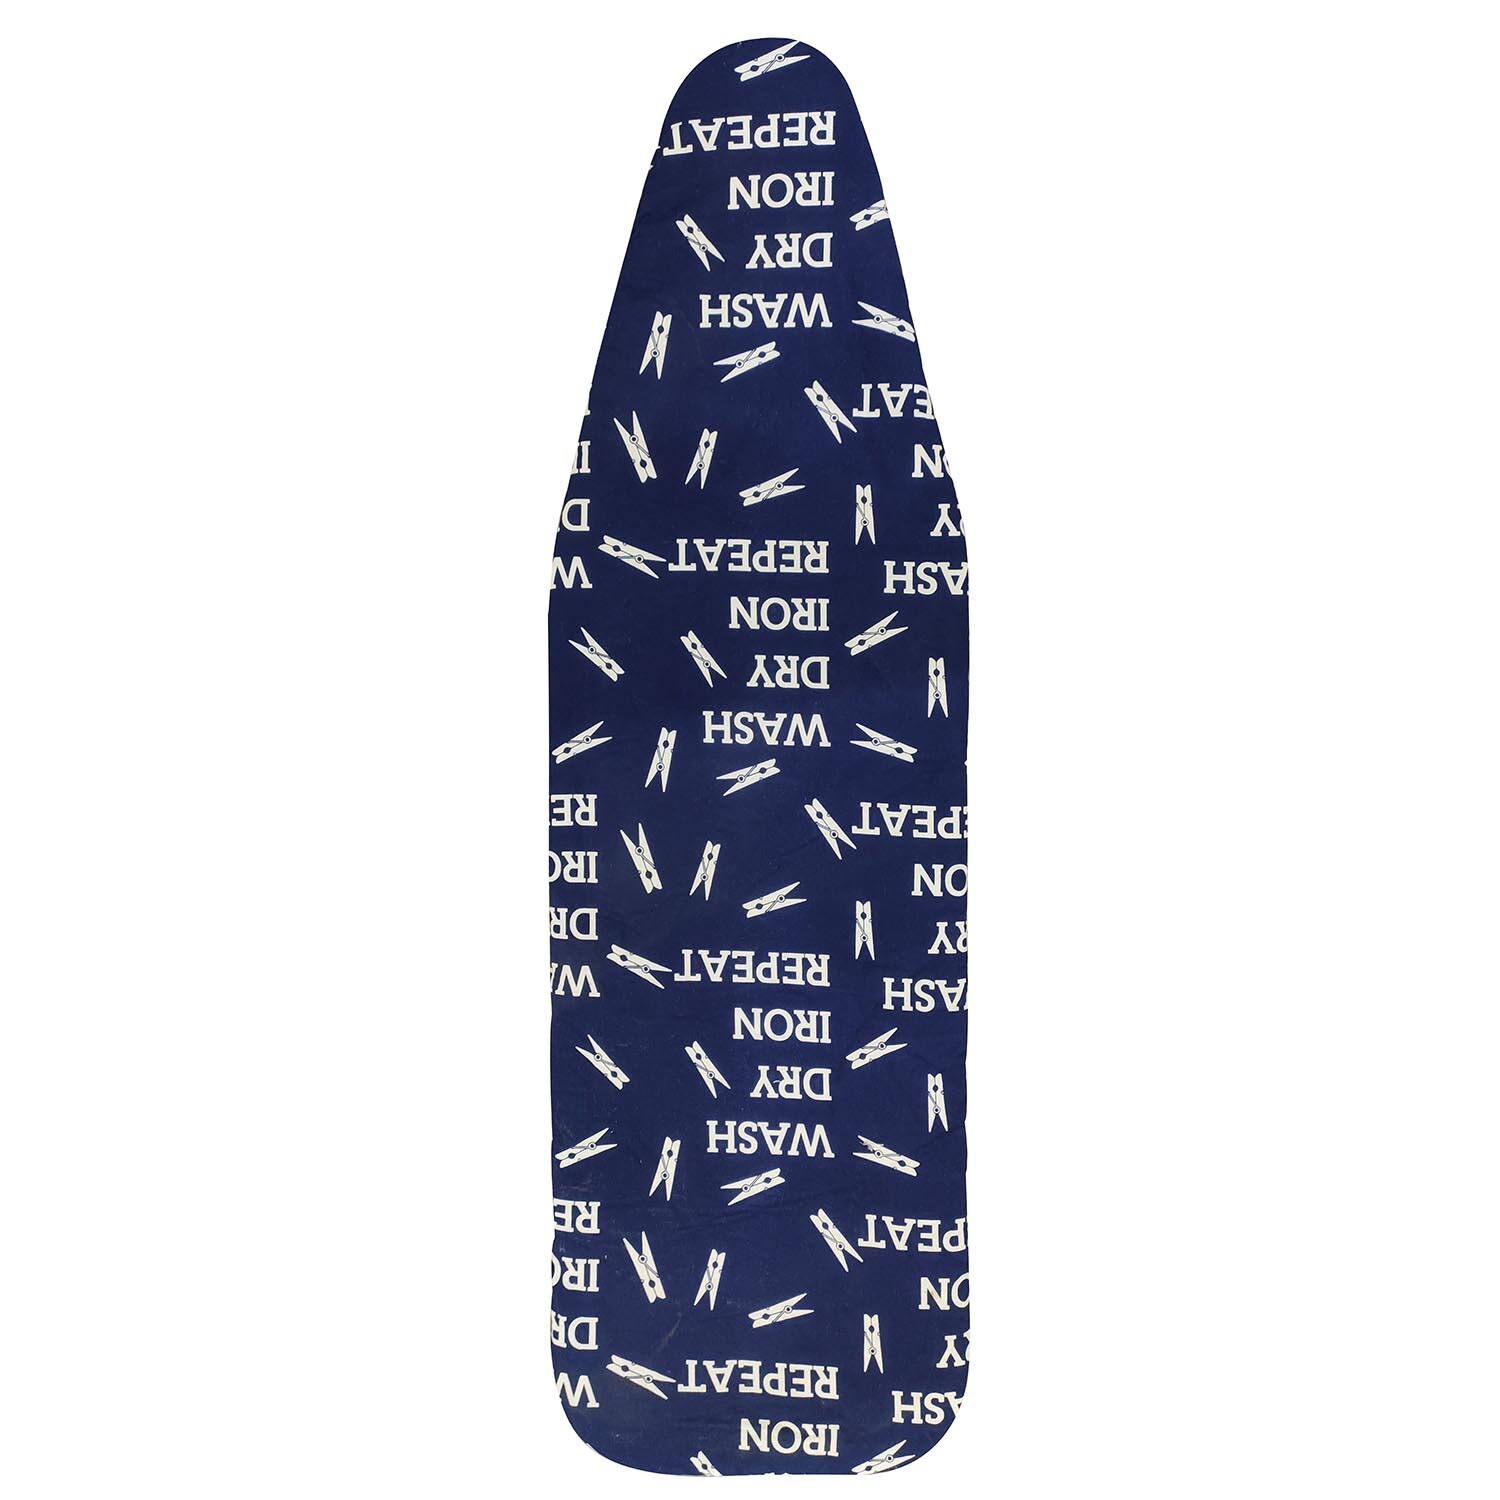 Ironing Board Cover - Small Image 5